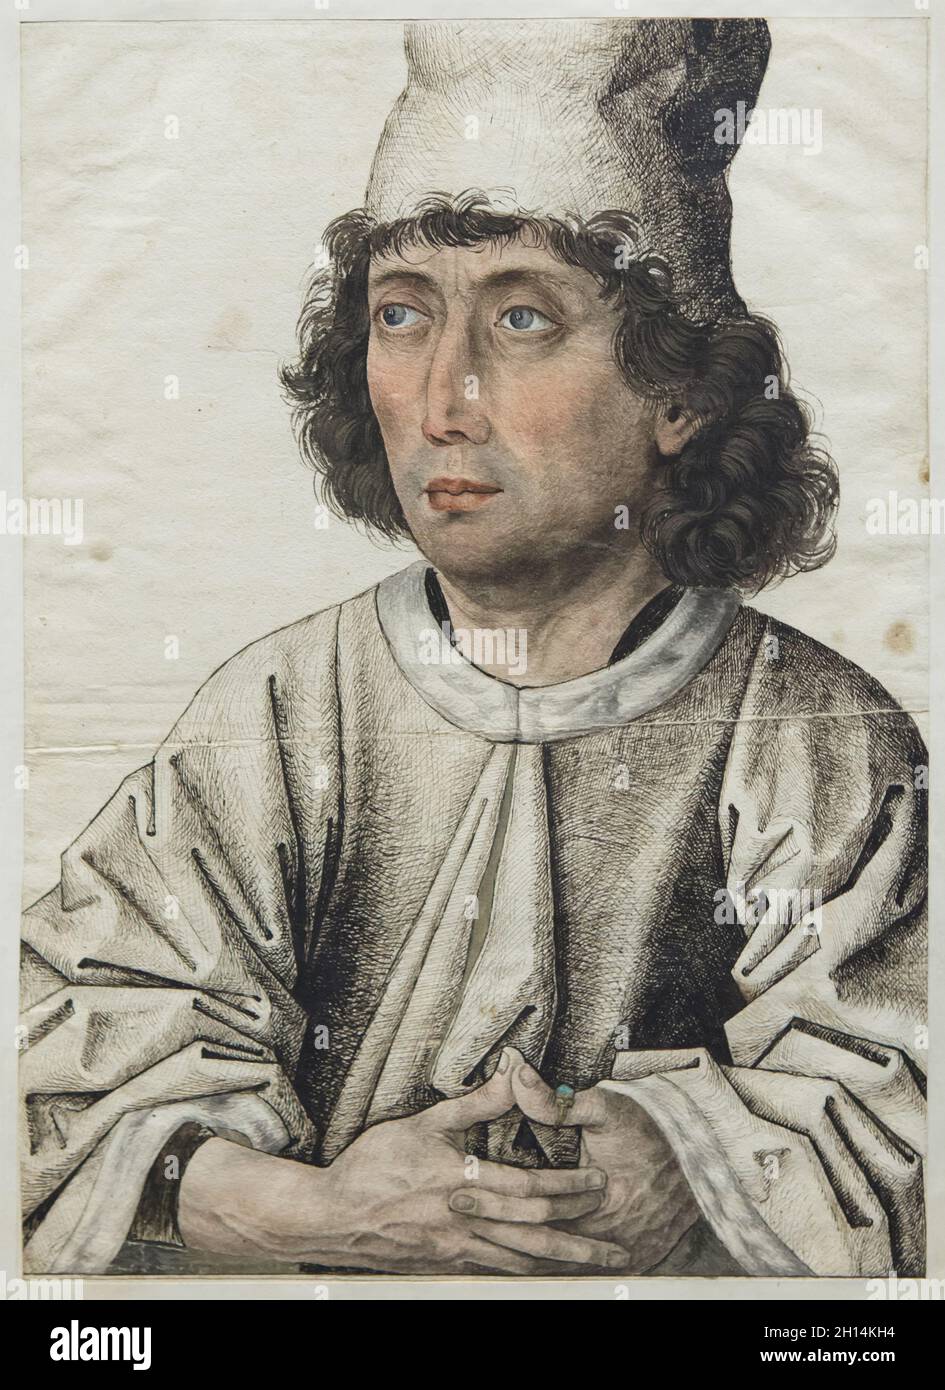 Drawing 'Portrait of a Young Man' attributed to German medieval painter known as the Master of the Mornauer Portrait (1470-1480) on display at the exhibition 'Late Gothic' in the Berliner Gemäldegalerie (Berlin Picture Gallery) in Berlin, Germany. Stock Photo